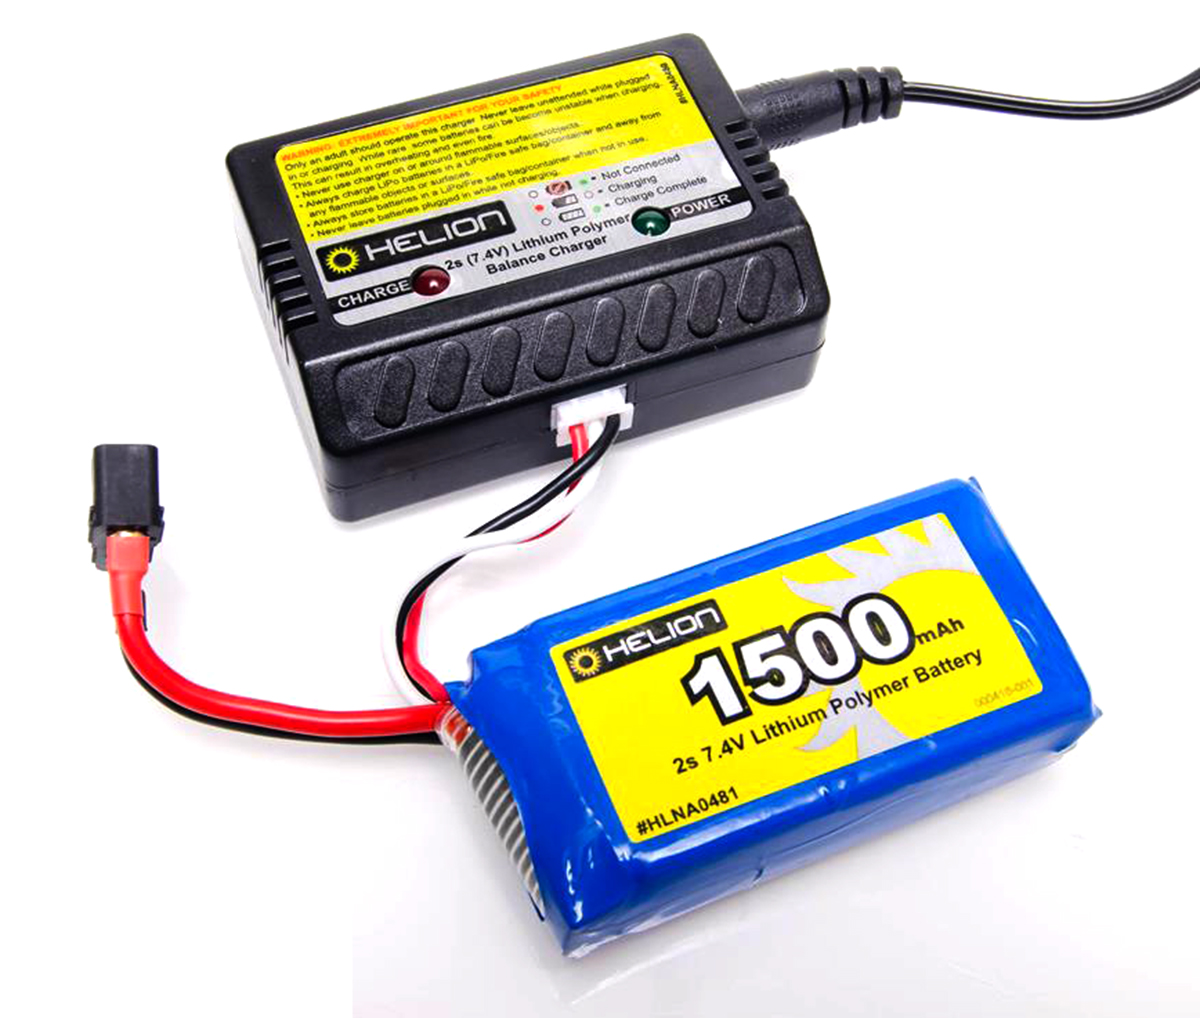 Helion Contakt 12TR charger lipo